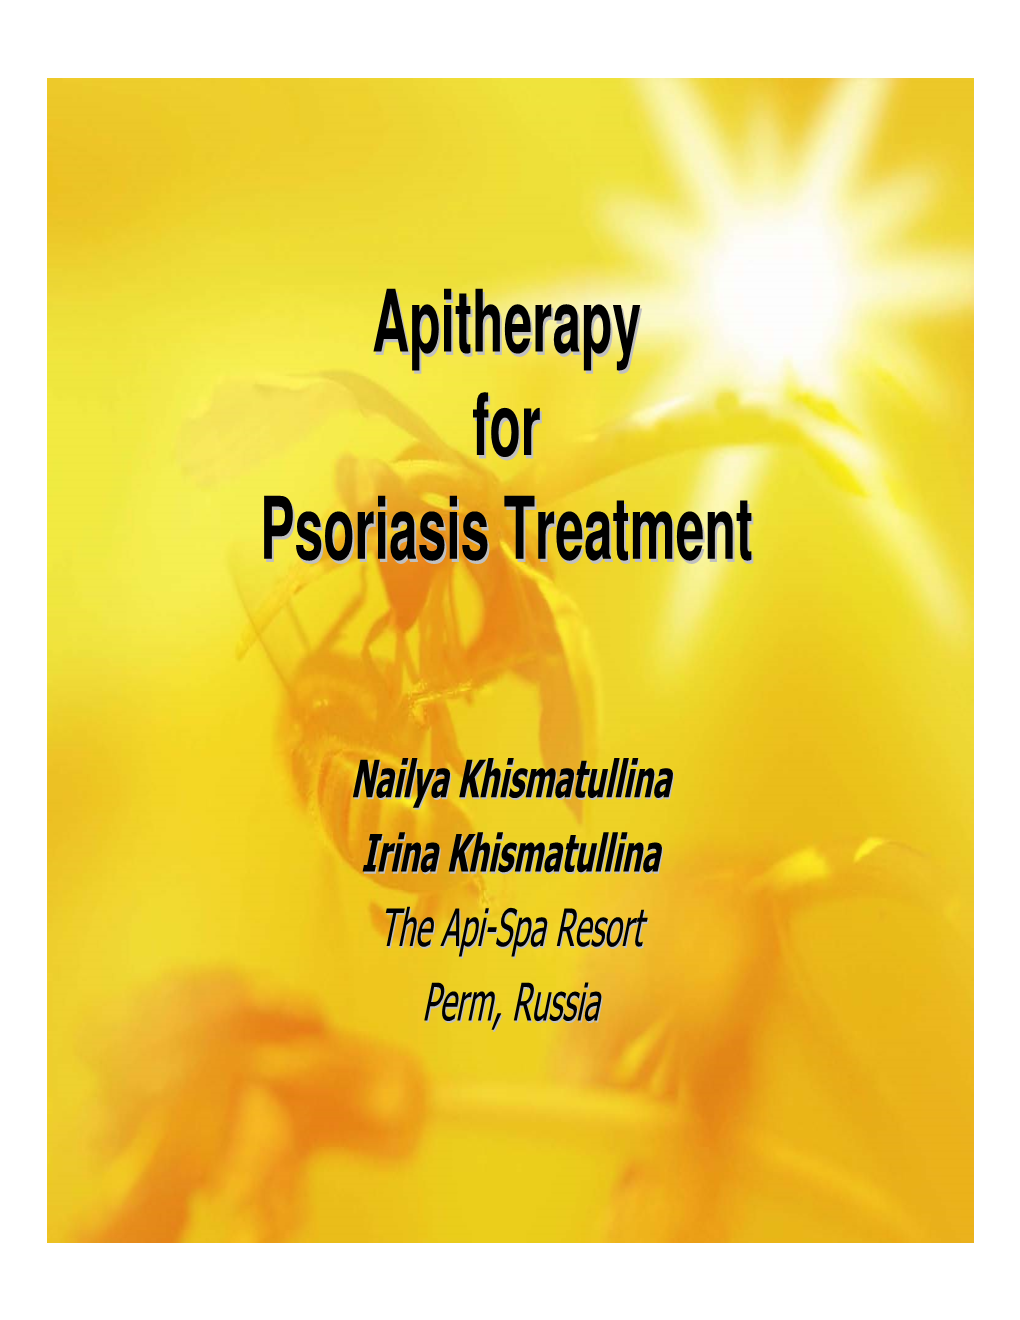 Apitherapy for Psoriasis Treatment